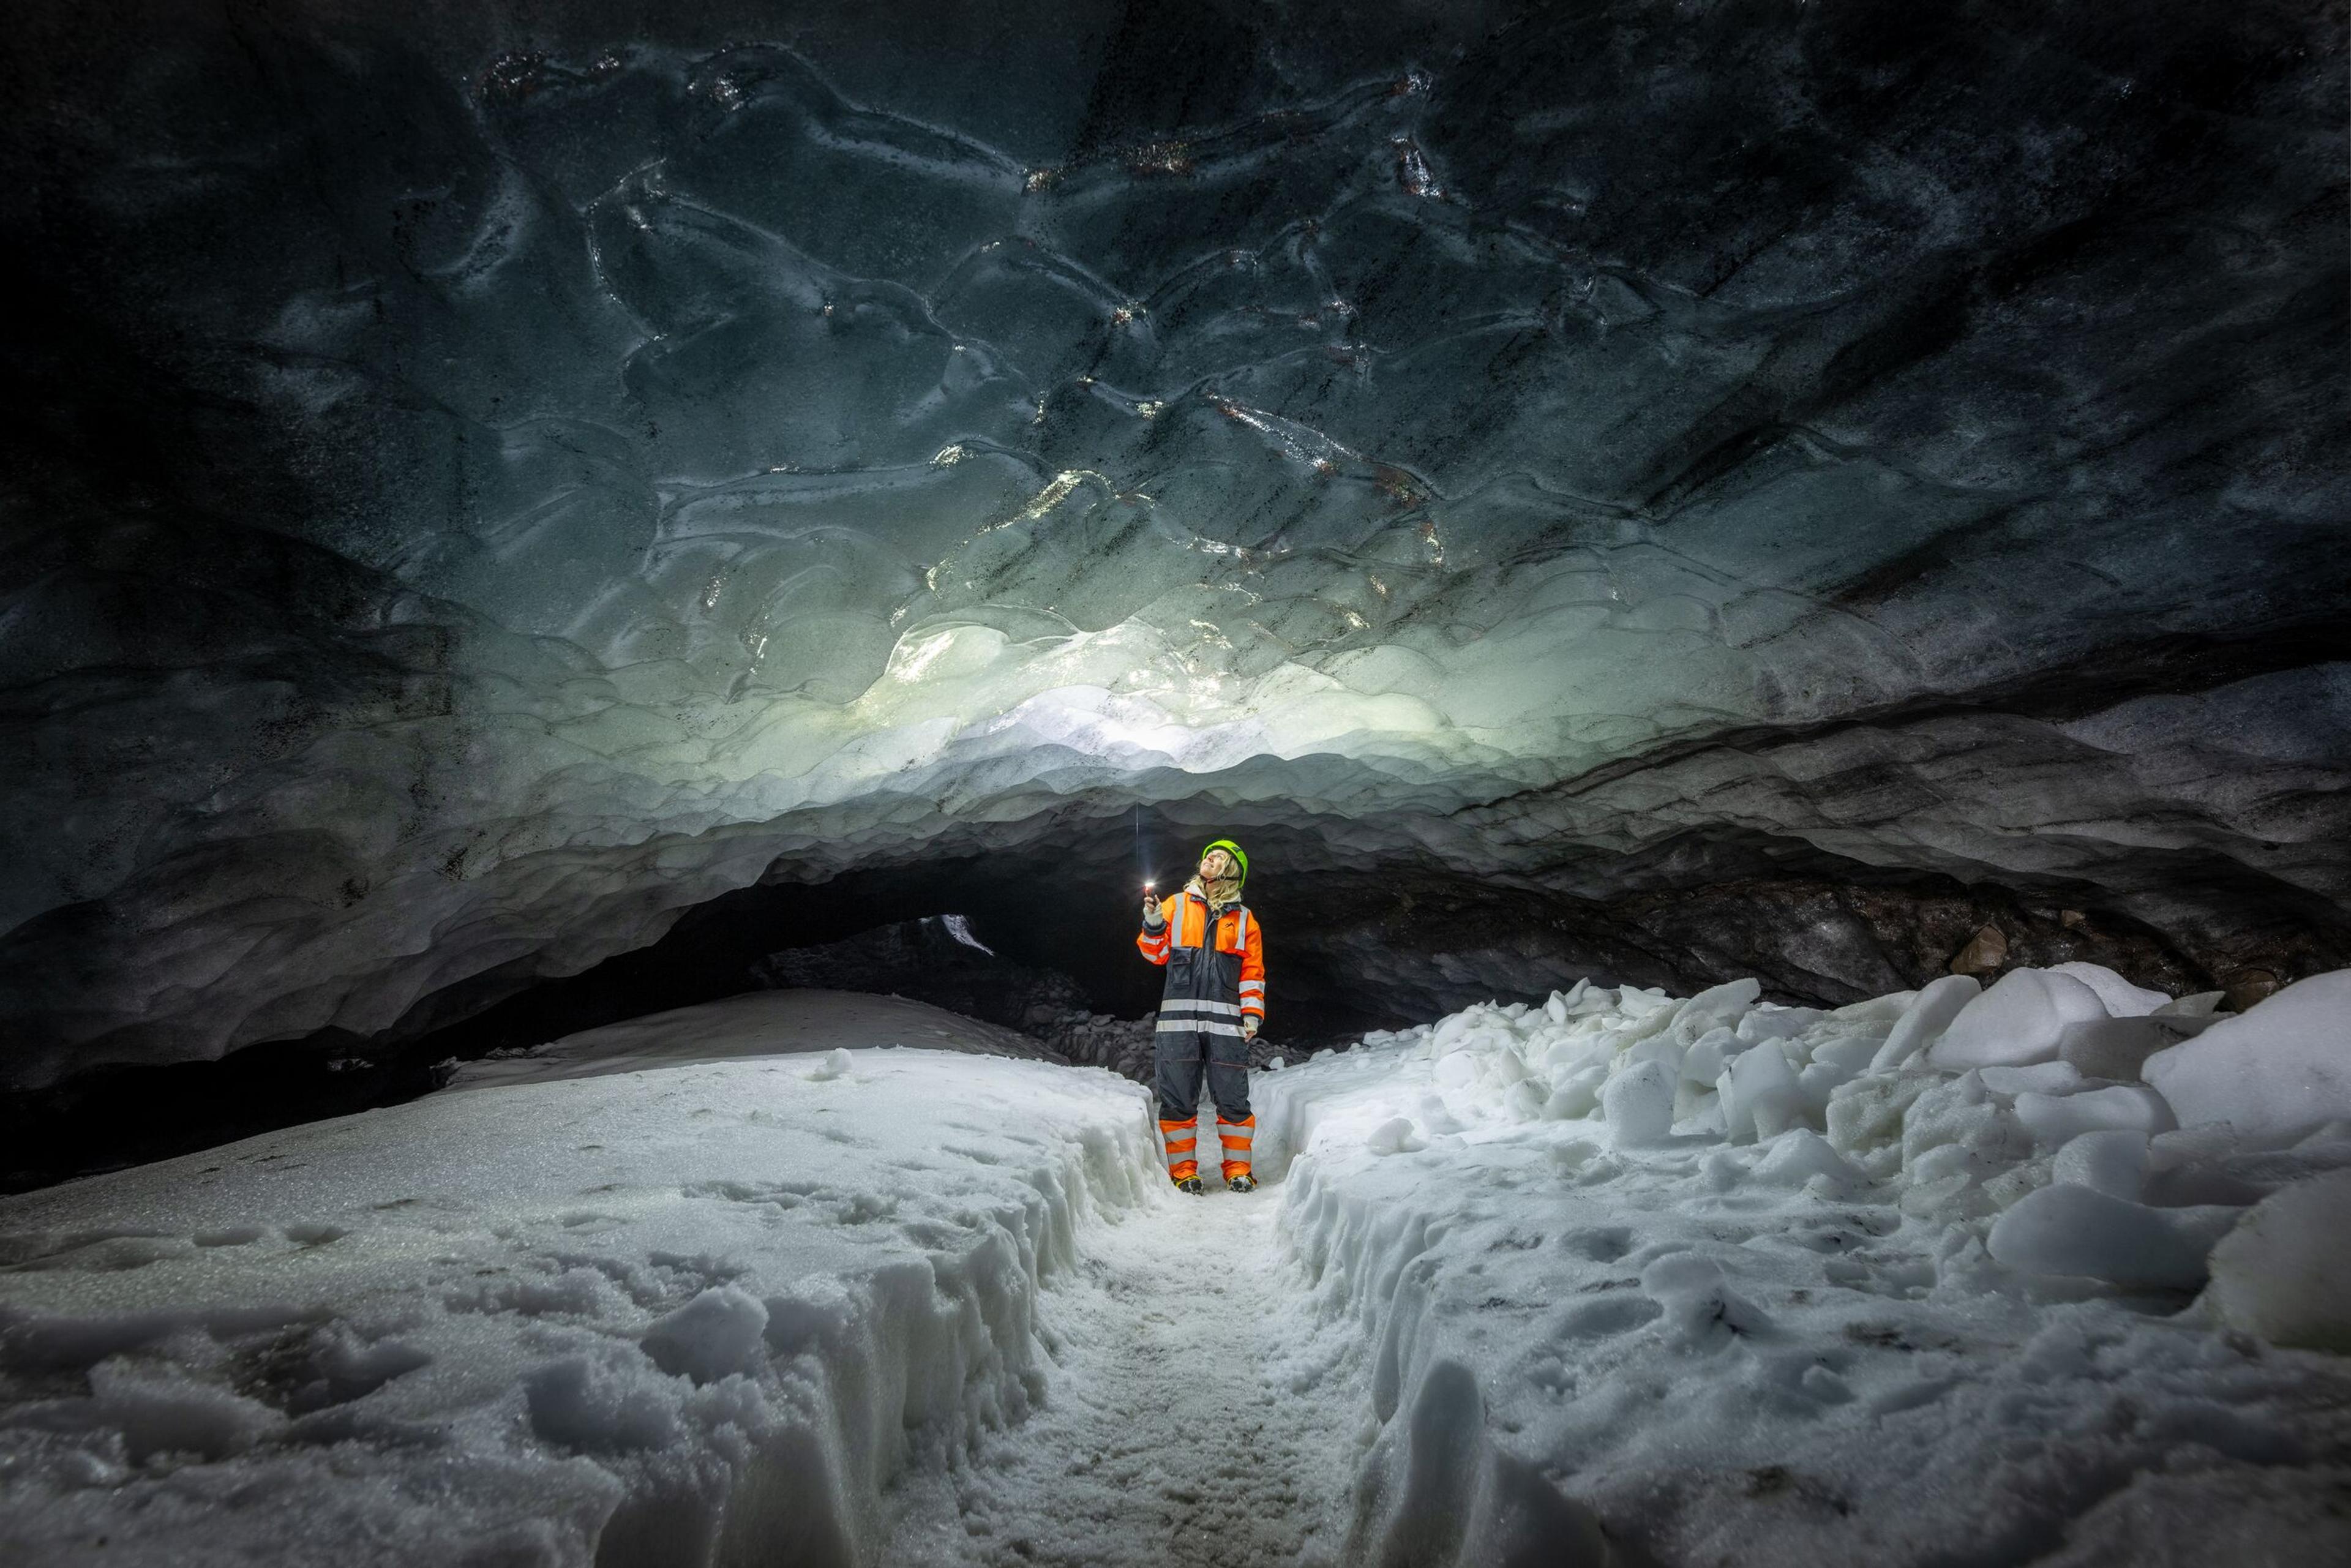 Person exploring an ice cave in Iceland, wearing an orange and black suit, surrounded by ice and snow with a glowing ceiling.